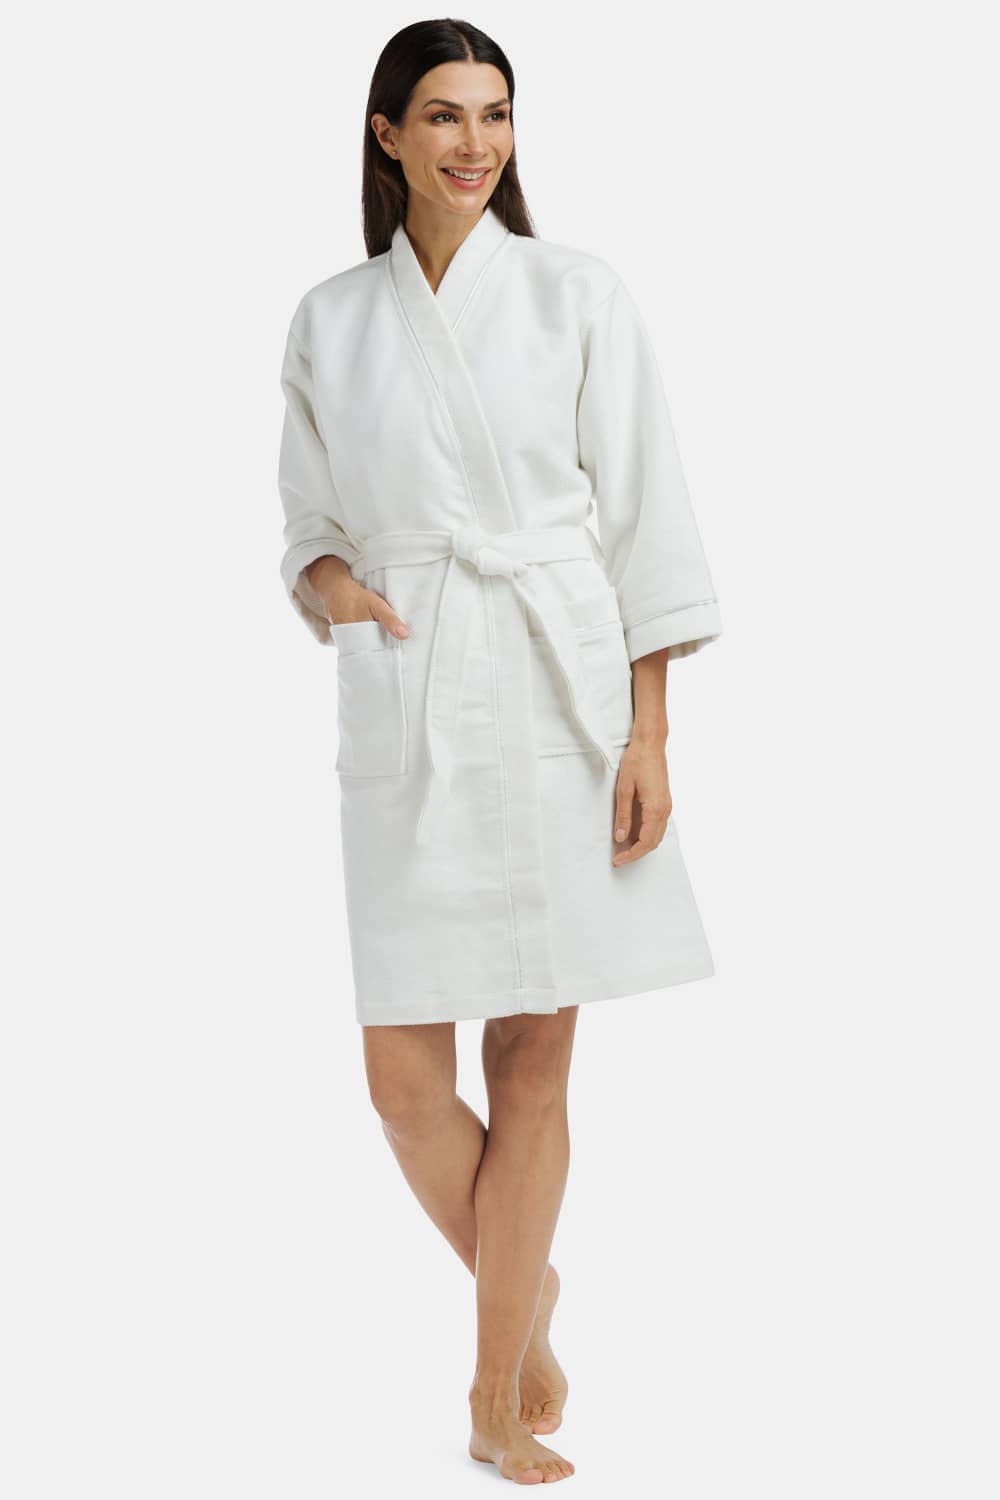 Women's Modal Kimono Resort Spa Robe with Quilted Design Womens>Sleep and Lounge>Robe Fishers Finery White Large 